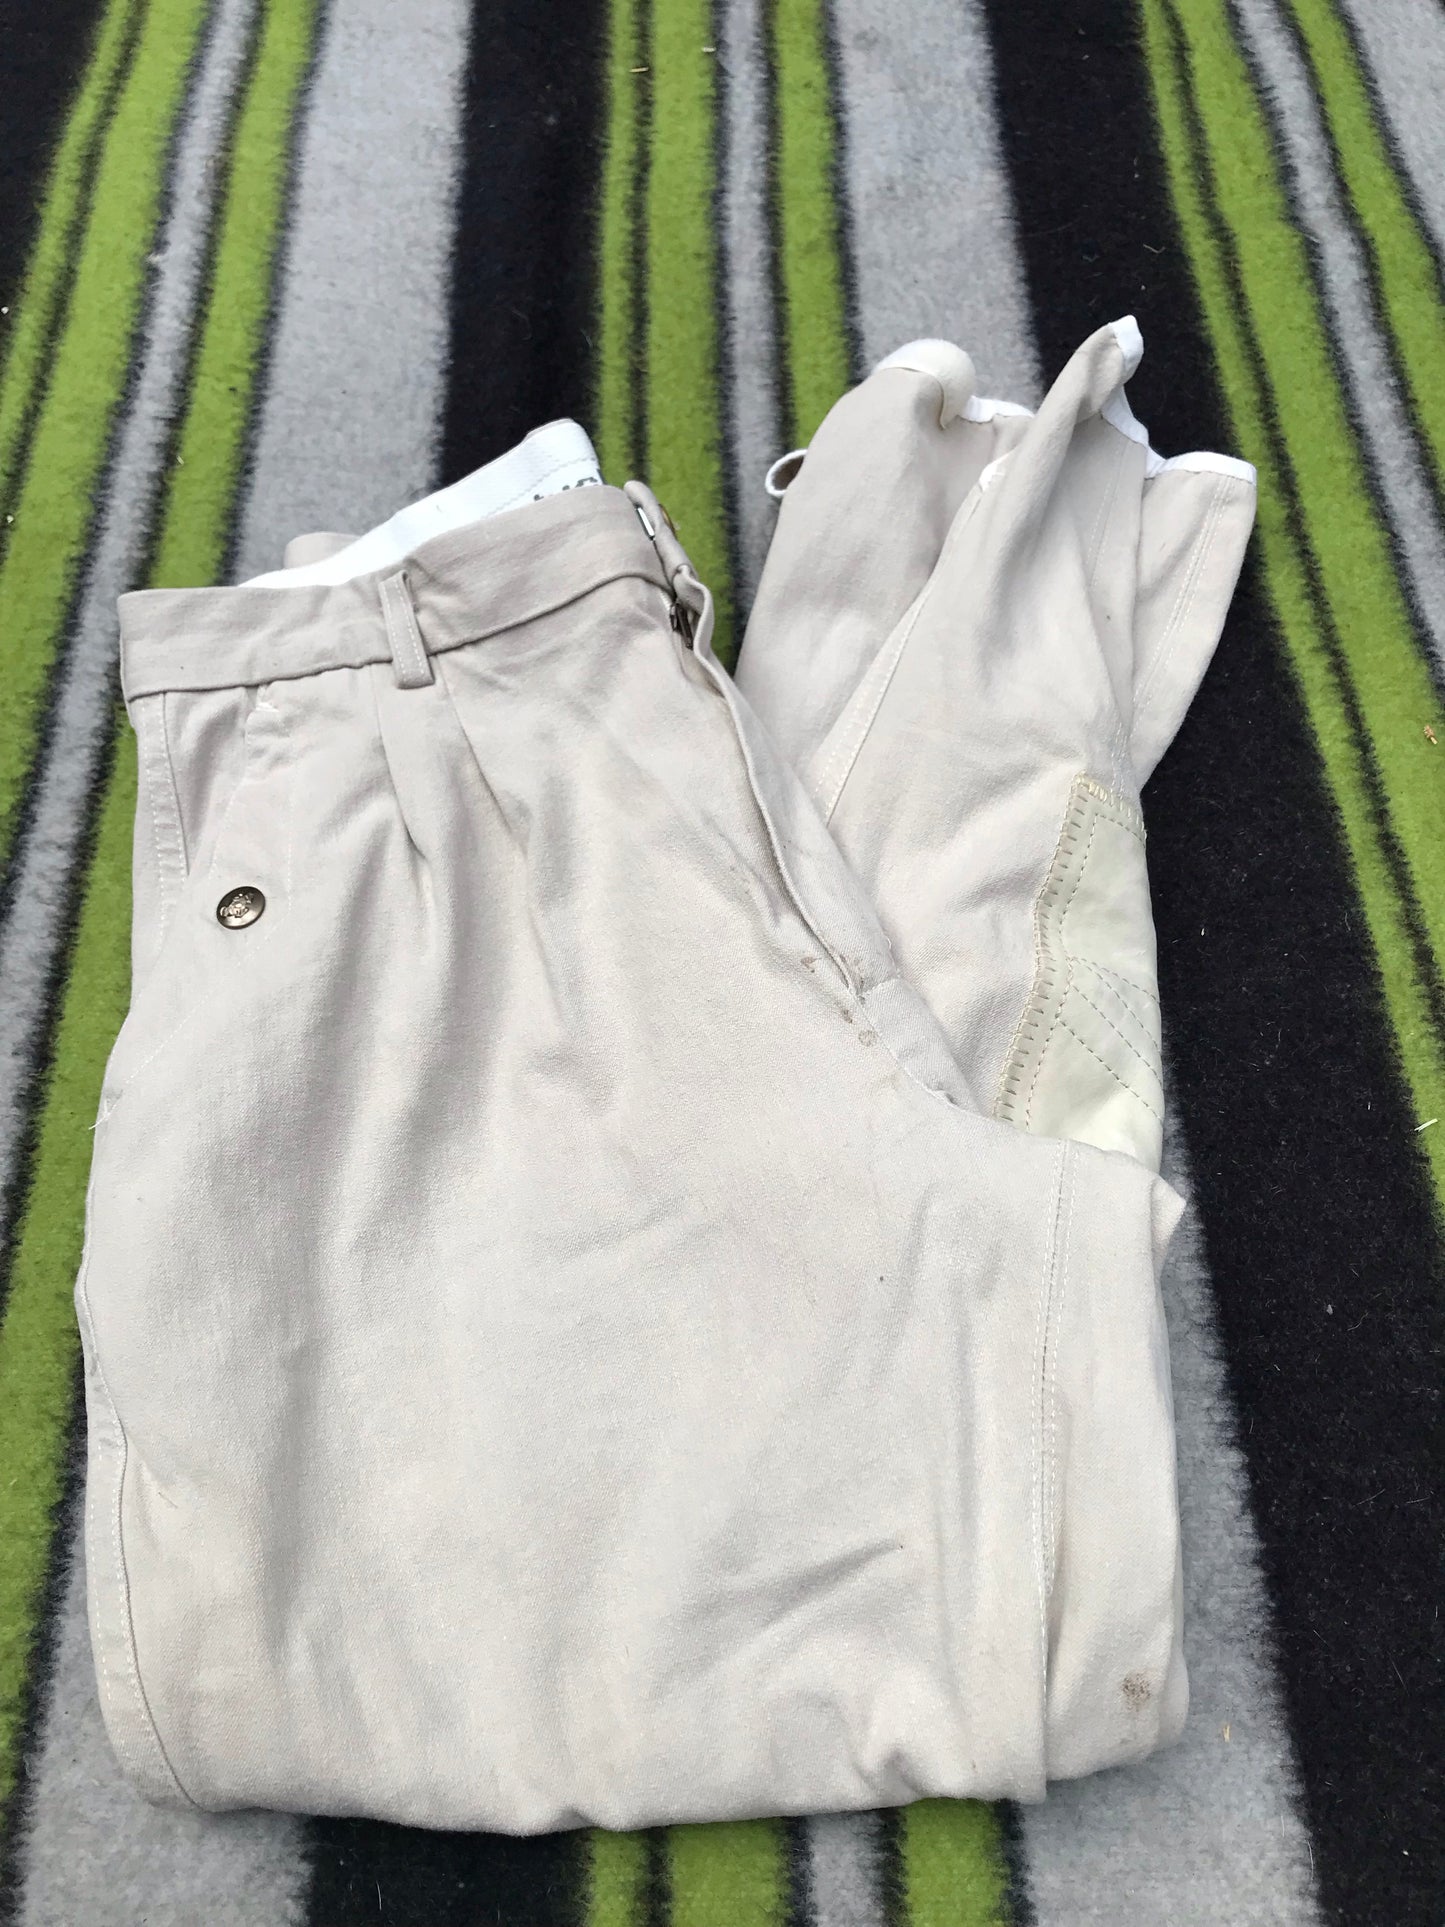 kentucky cream breeches approx size 14 FREE POSTAGE